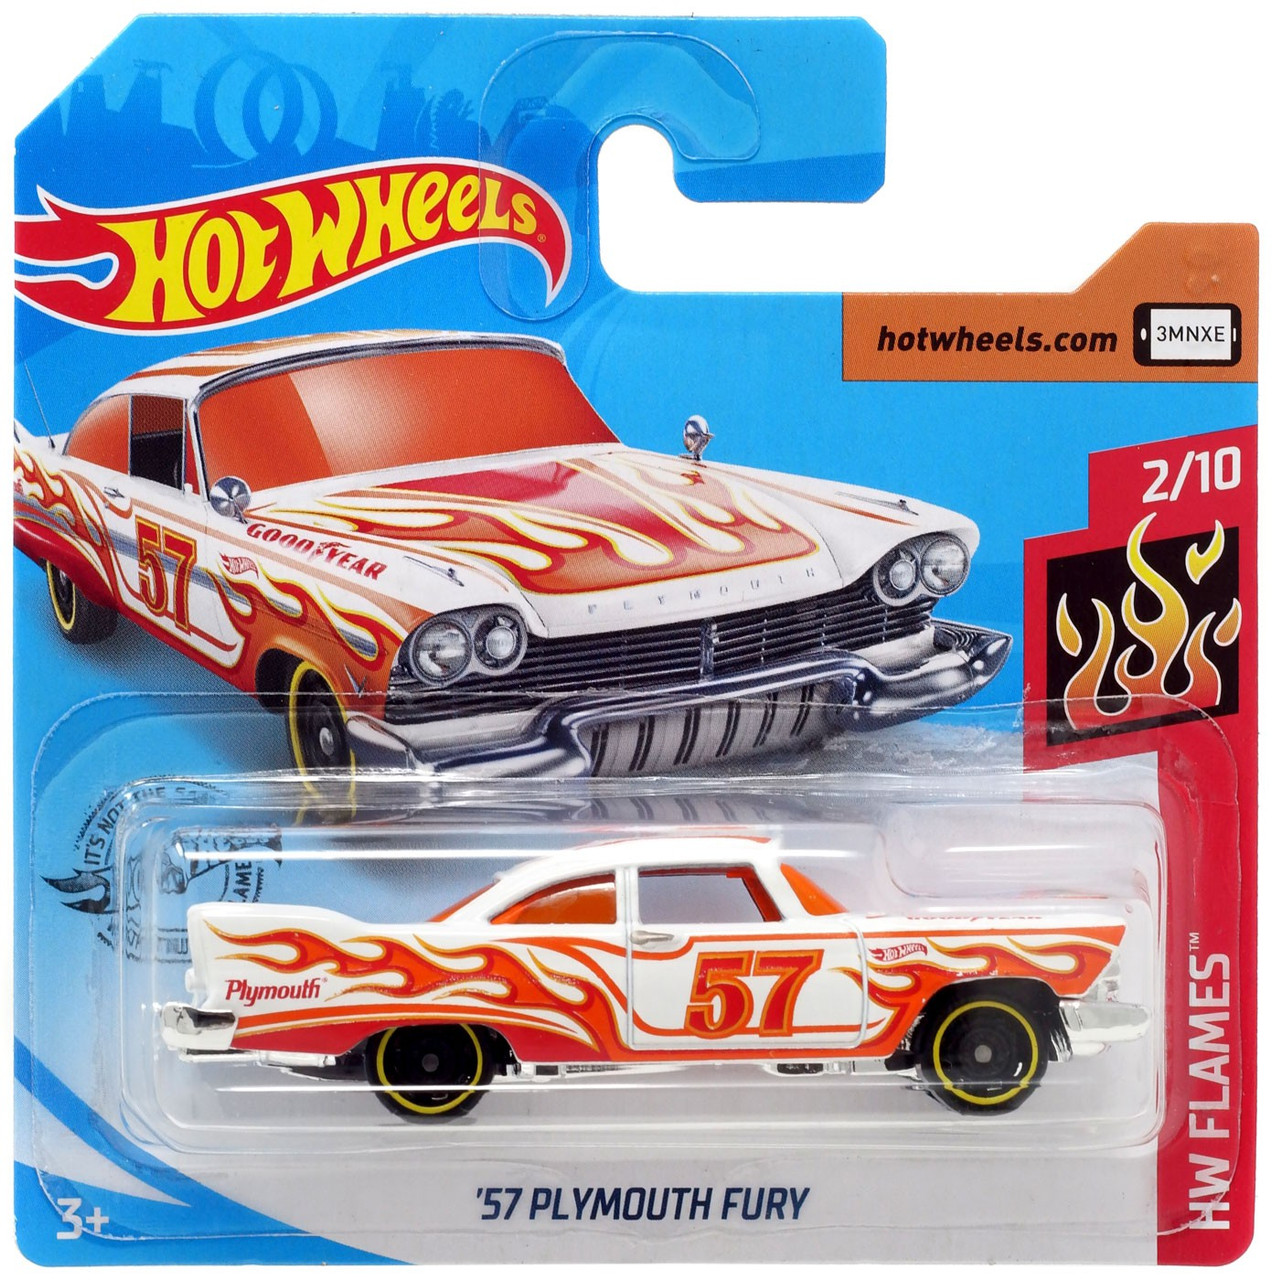 Hot Wheels Hw Flames 57 Plymouth Fury 164 Diecast Car 210 Short Card Mattel Toys Toywiz - 4 01 3 210 1 on trending roblox 2 reveal new coming 2020